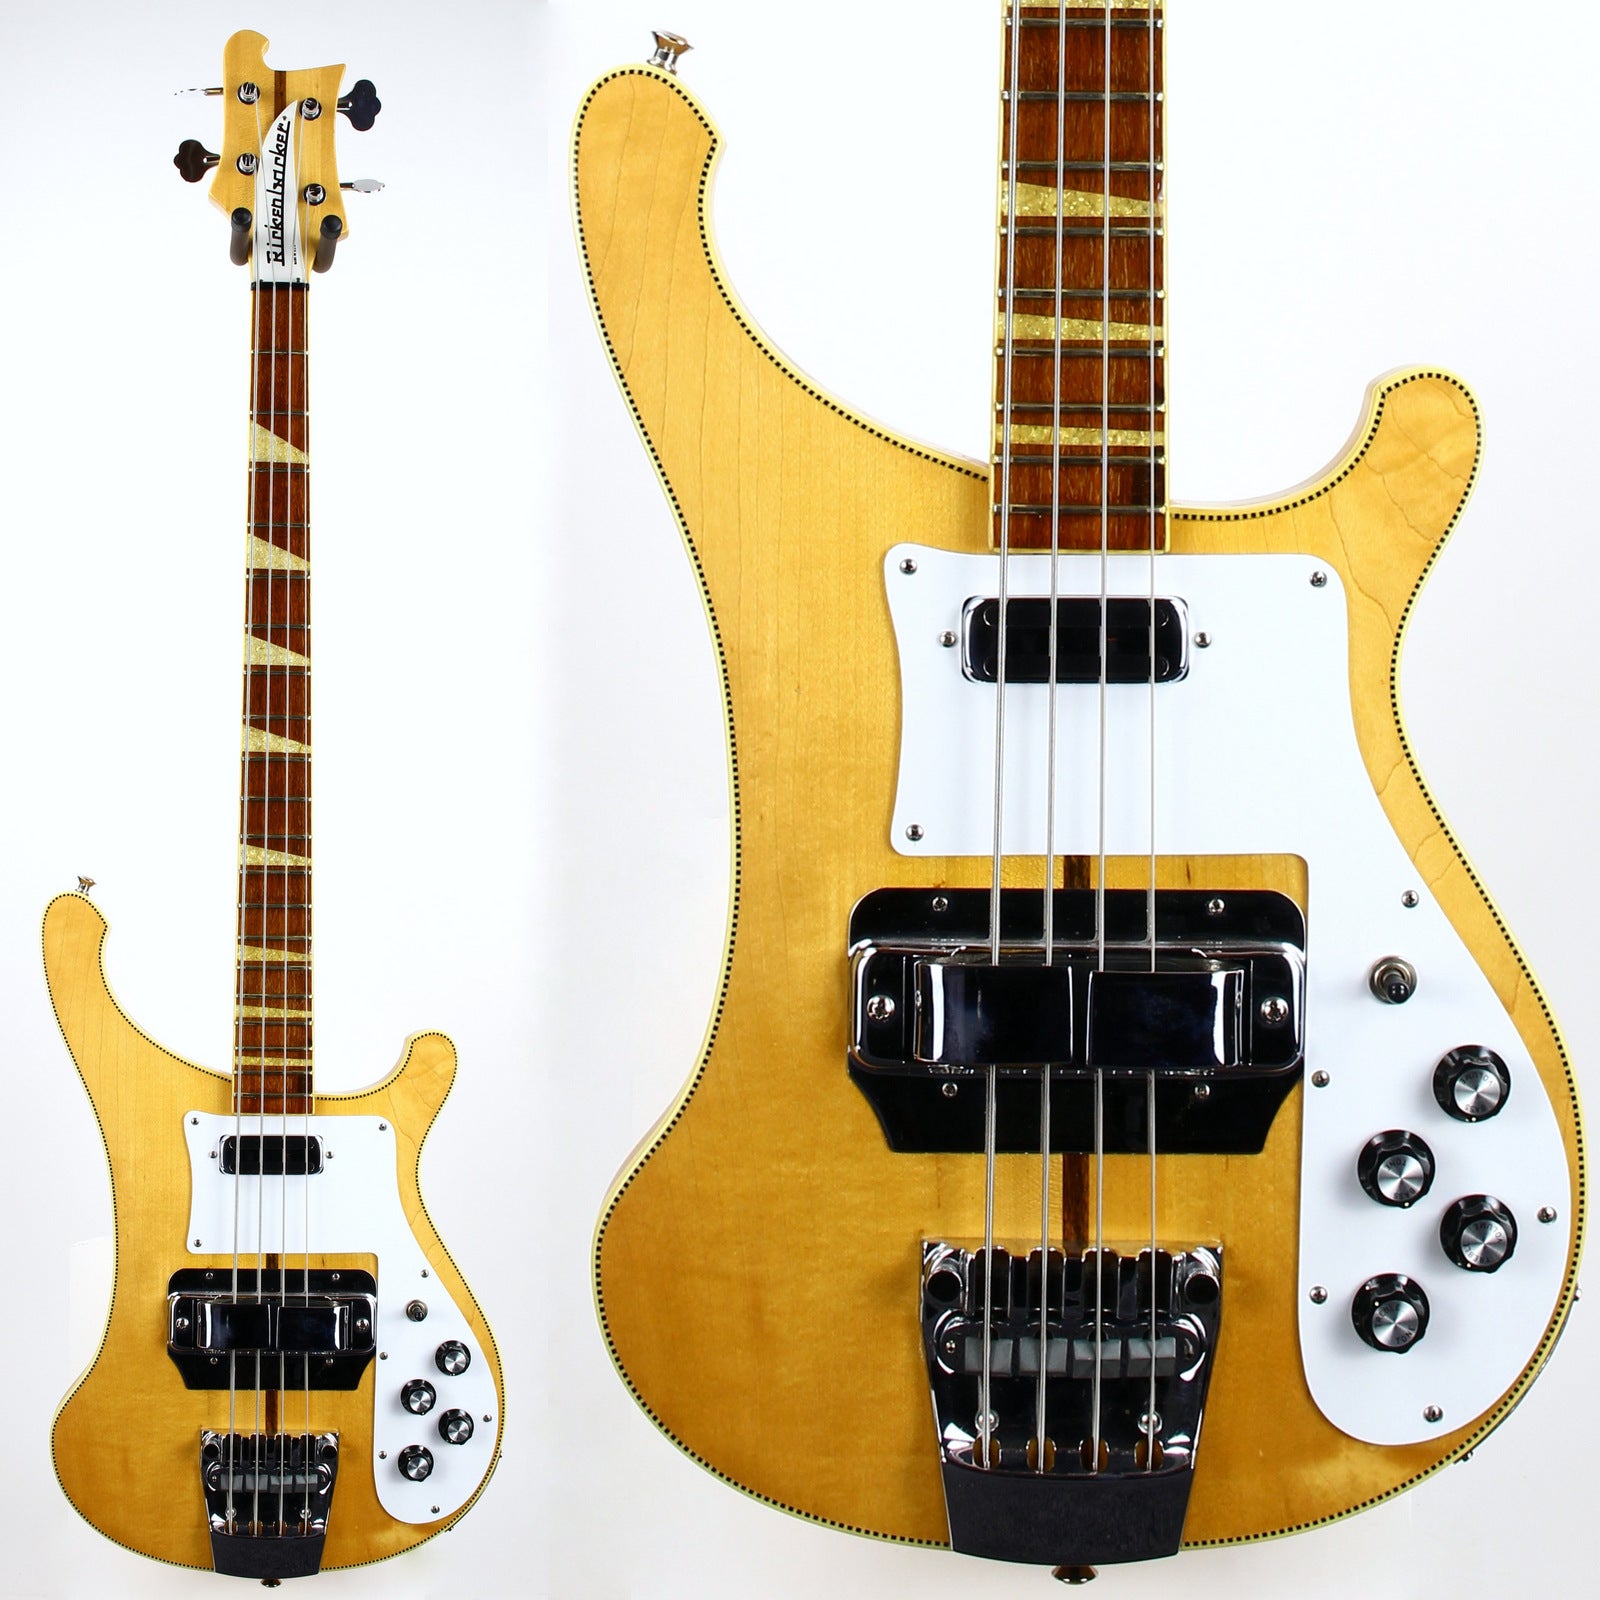 1972 Rickenbacker 4001 Mapleglo Vintage Electric Bass Guitar | Checkerboard Binding, Toaster Pickup, Full Crushed Pearl Inlays!